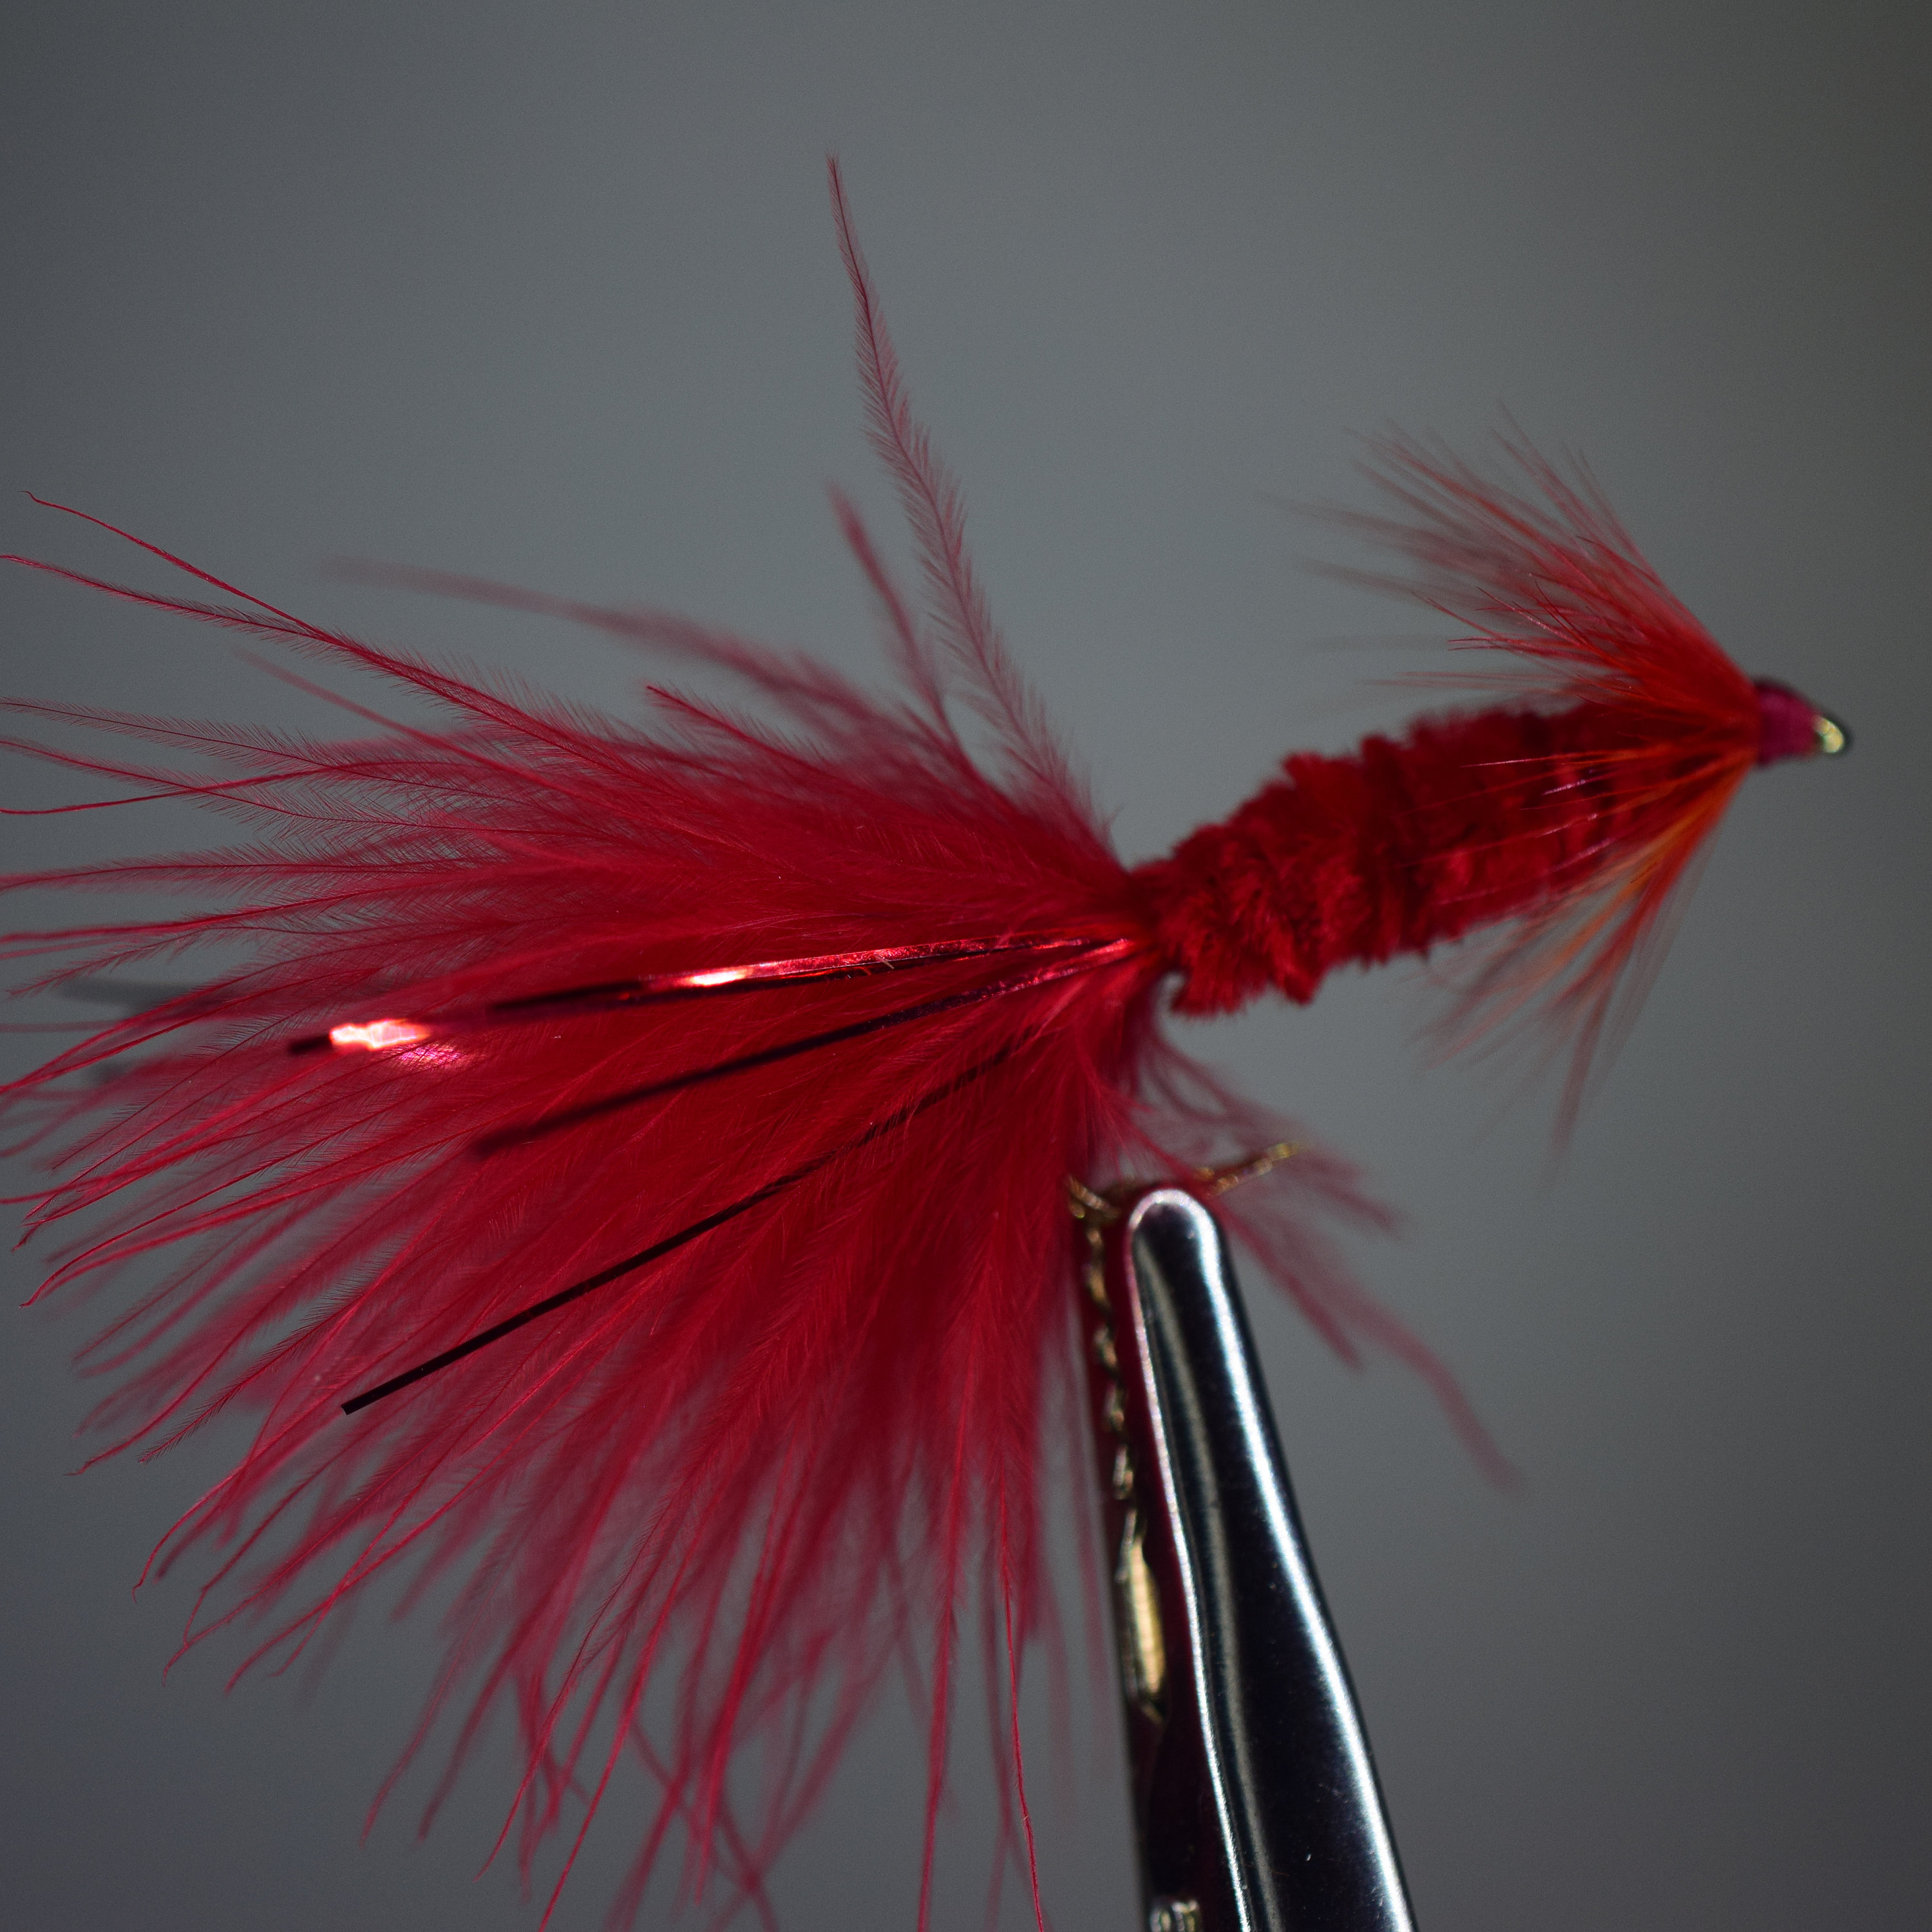 Details about   Fly Fishing Flies Bug Eyed Bugger Chartreuse Bass, Trout, Salmon x 6